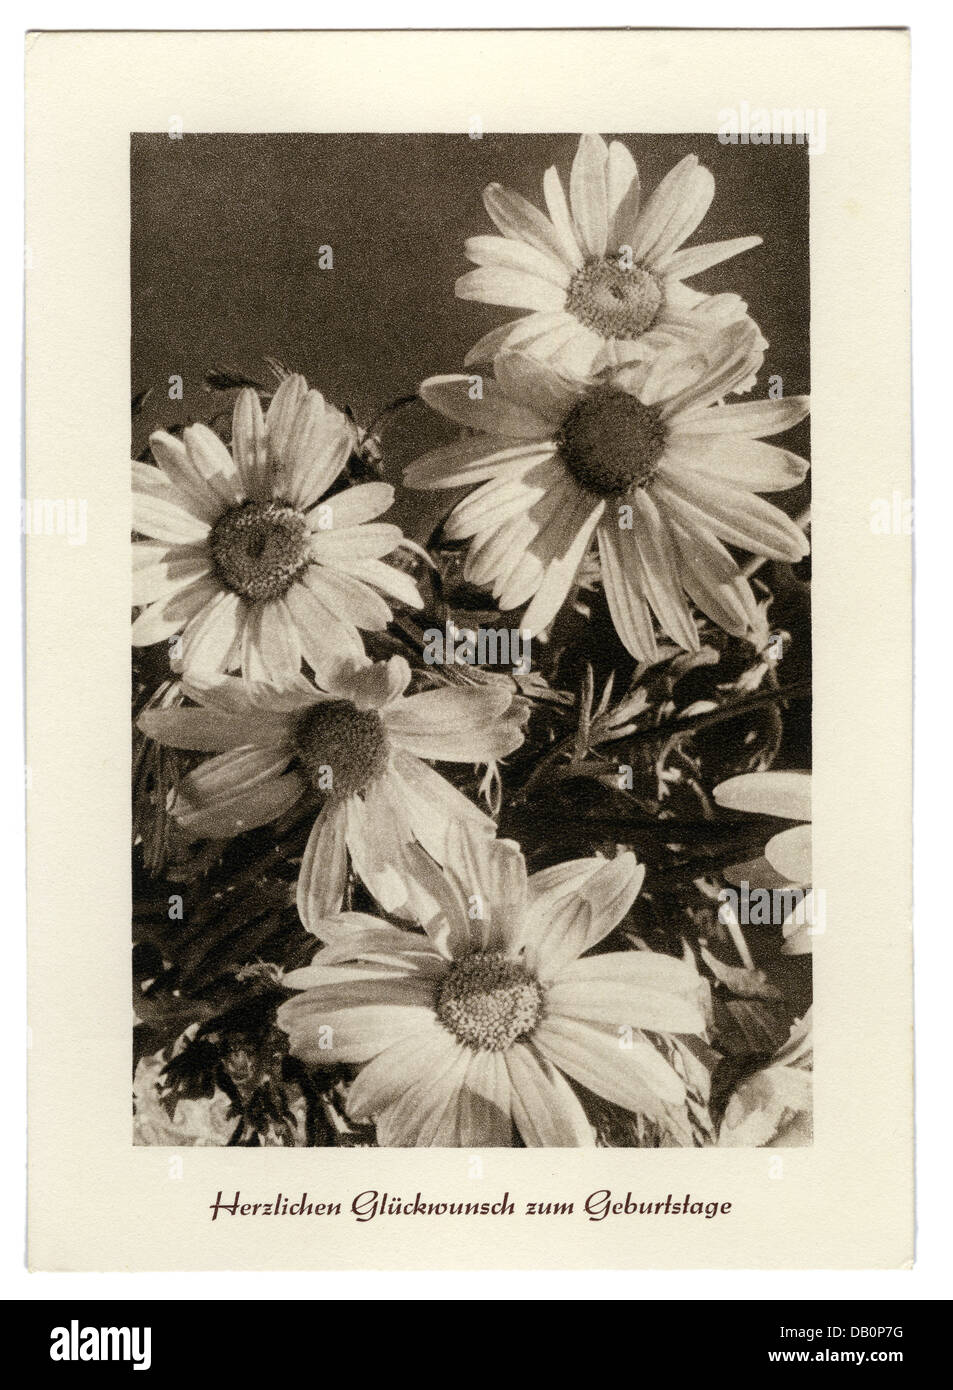 festivities, greetings card birthday, 'Herzlichen Glückwunsch zum Geburtstag' (Warmest congratulations for your birthday), daisies, picture postcard, Germany, 1930s, Additional-Rights-Clearences-Not Available Stock Photo